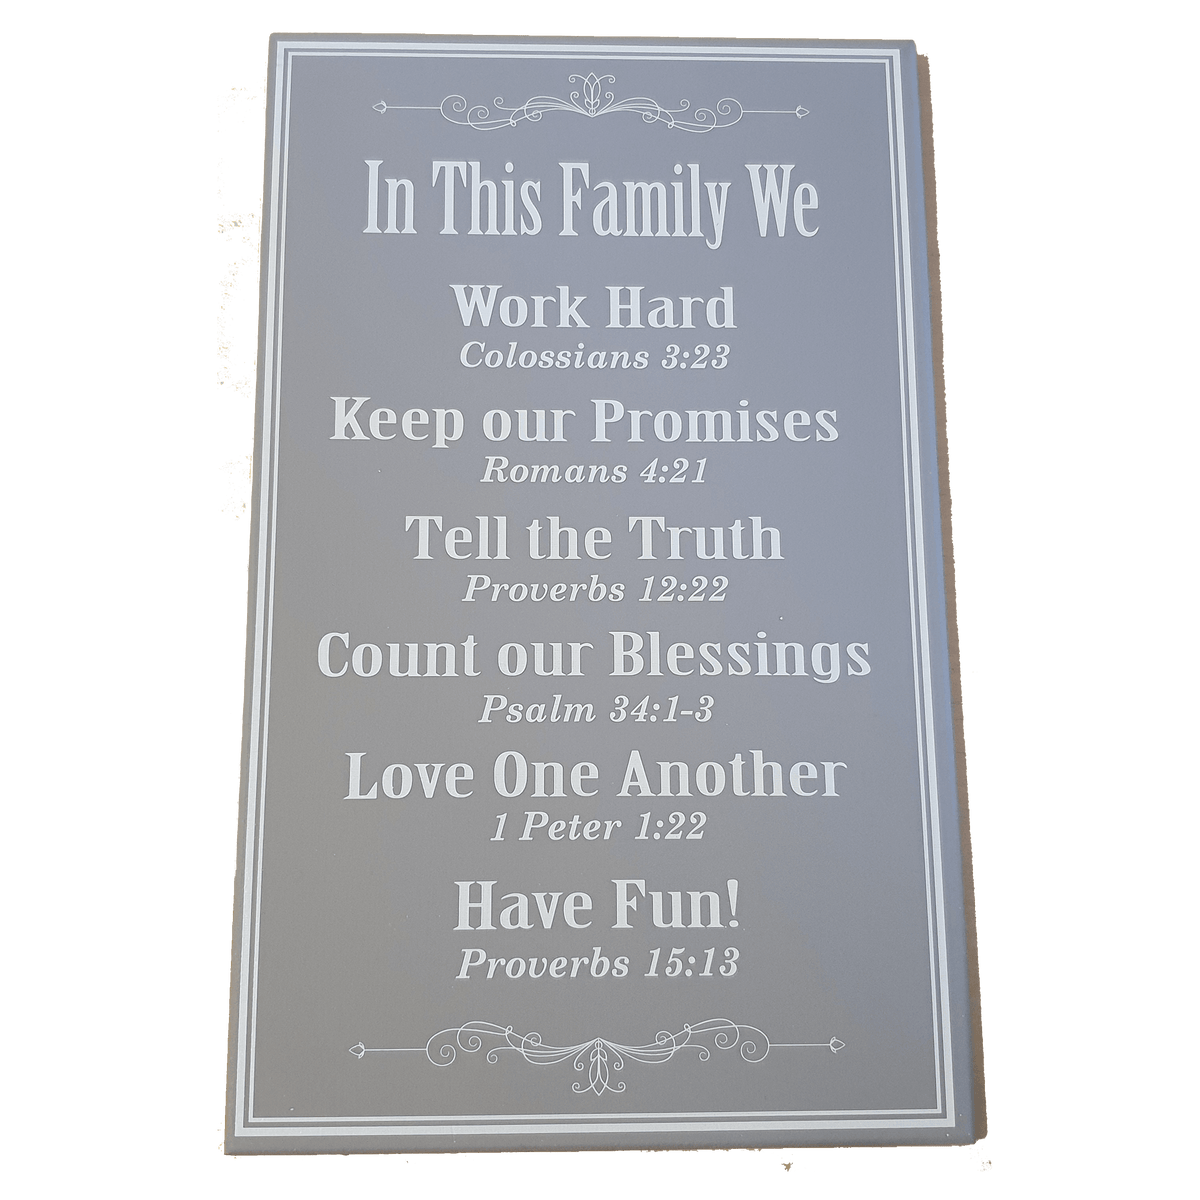 C&F Wooden In This Family We (Grey) Quote Plaque